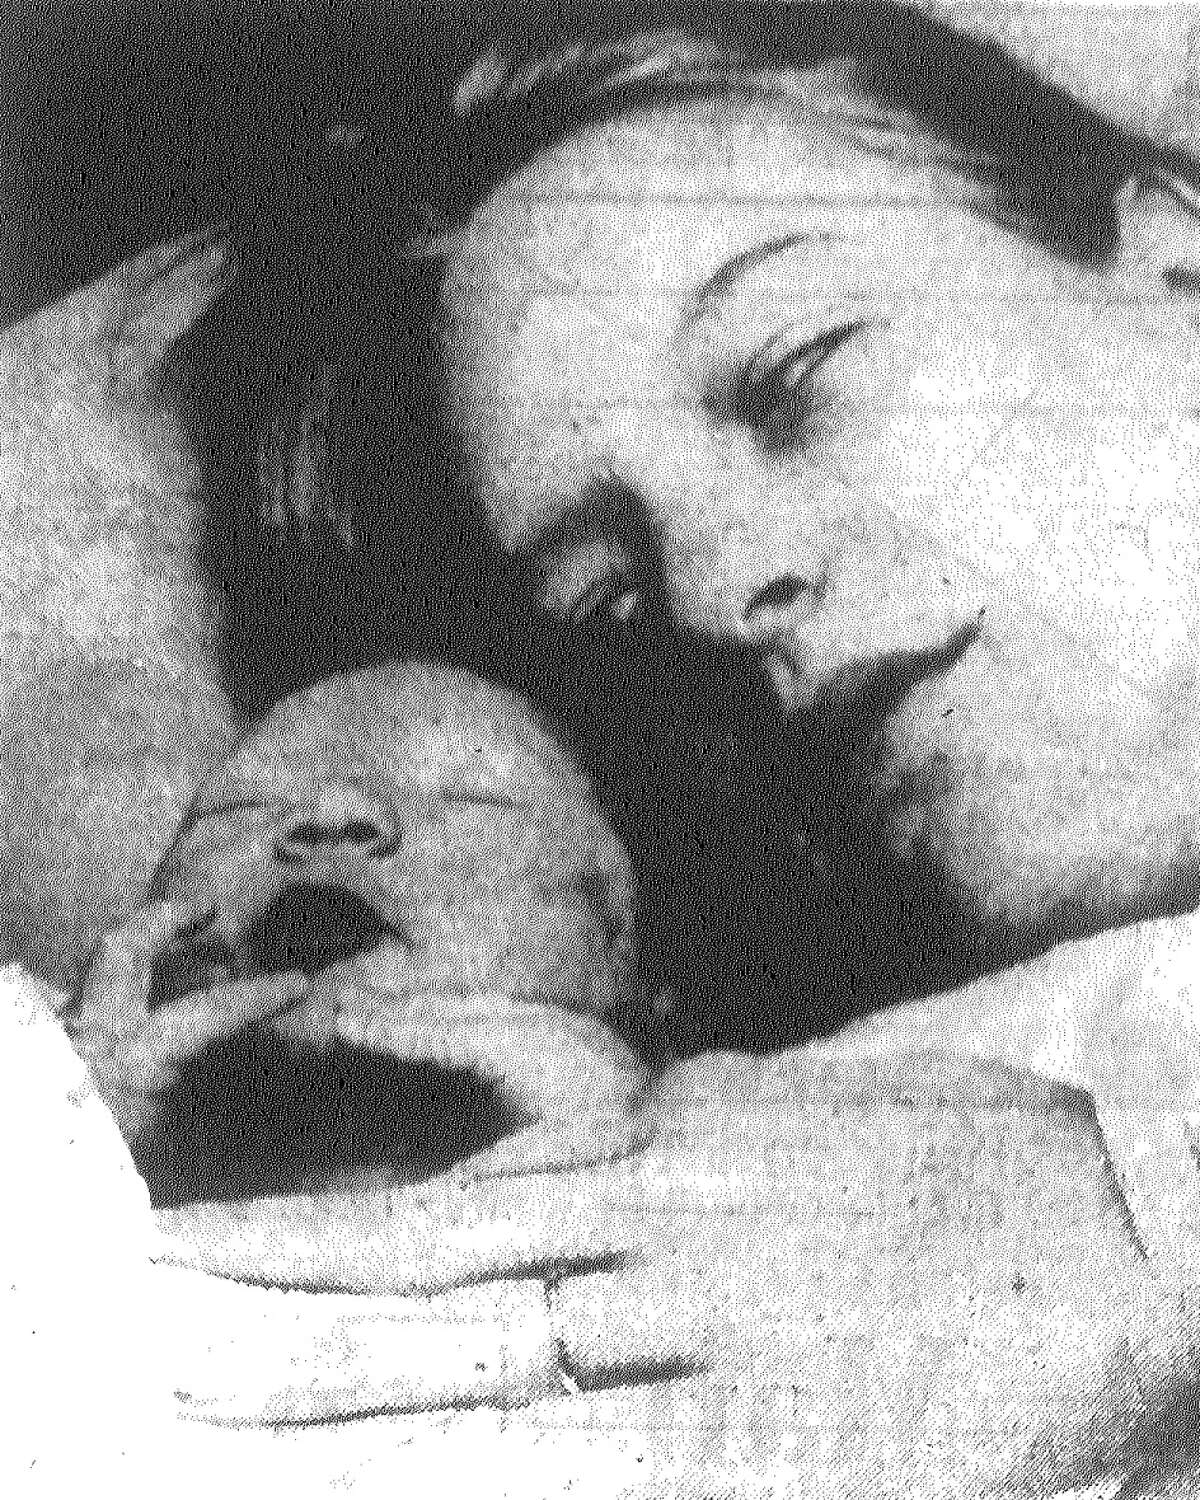 The first baby of the New Year 1973, Michael A. Scott, sleeps close to his mom, Mrs. Keith Scott, at Wilford Hall Air Force Hospital. The eight pound, one ounce boy was born at 12:06 a.m. Published in the San Antonio Light Jan. 1, 1973.